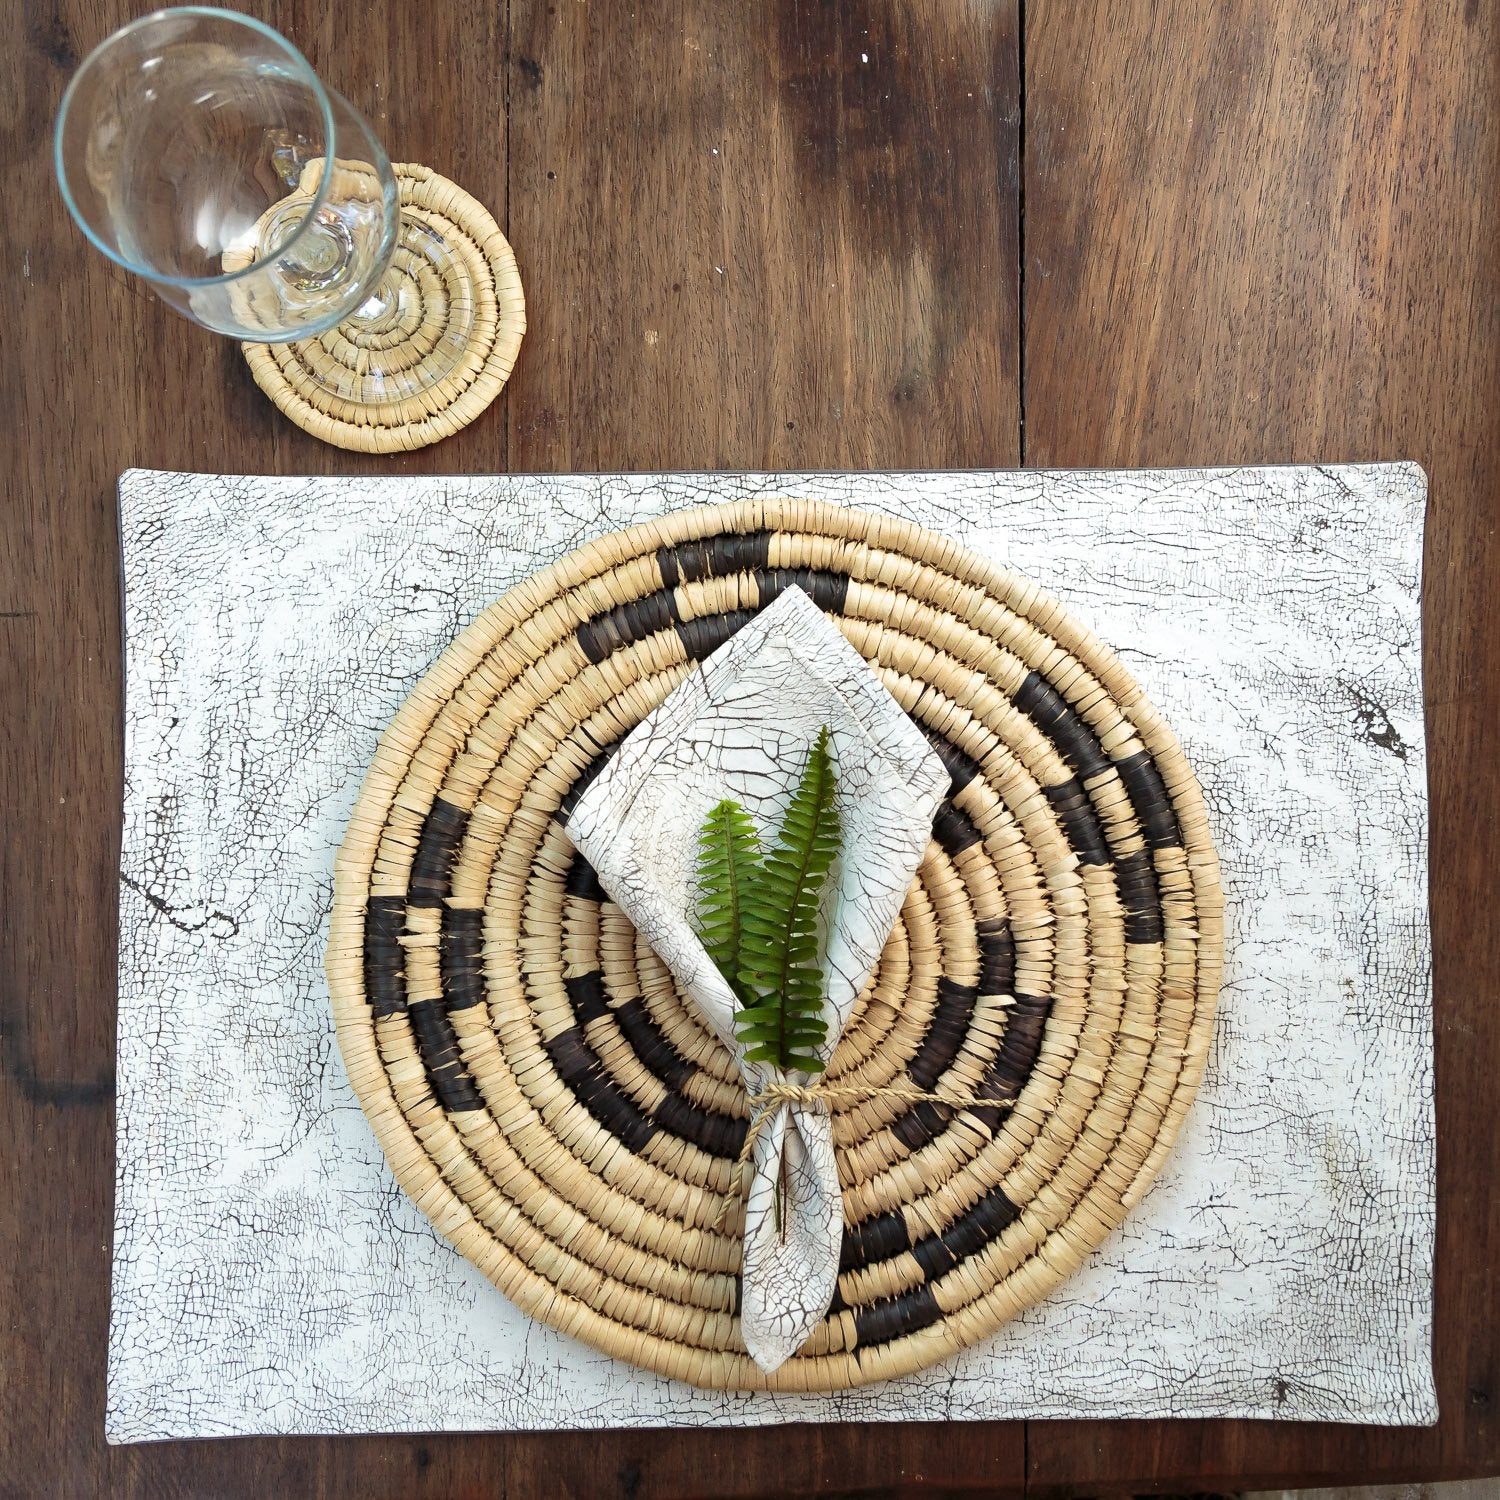 Woven Placemat with Patterns